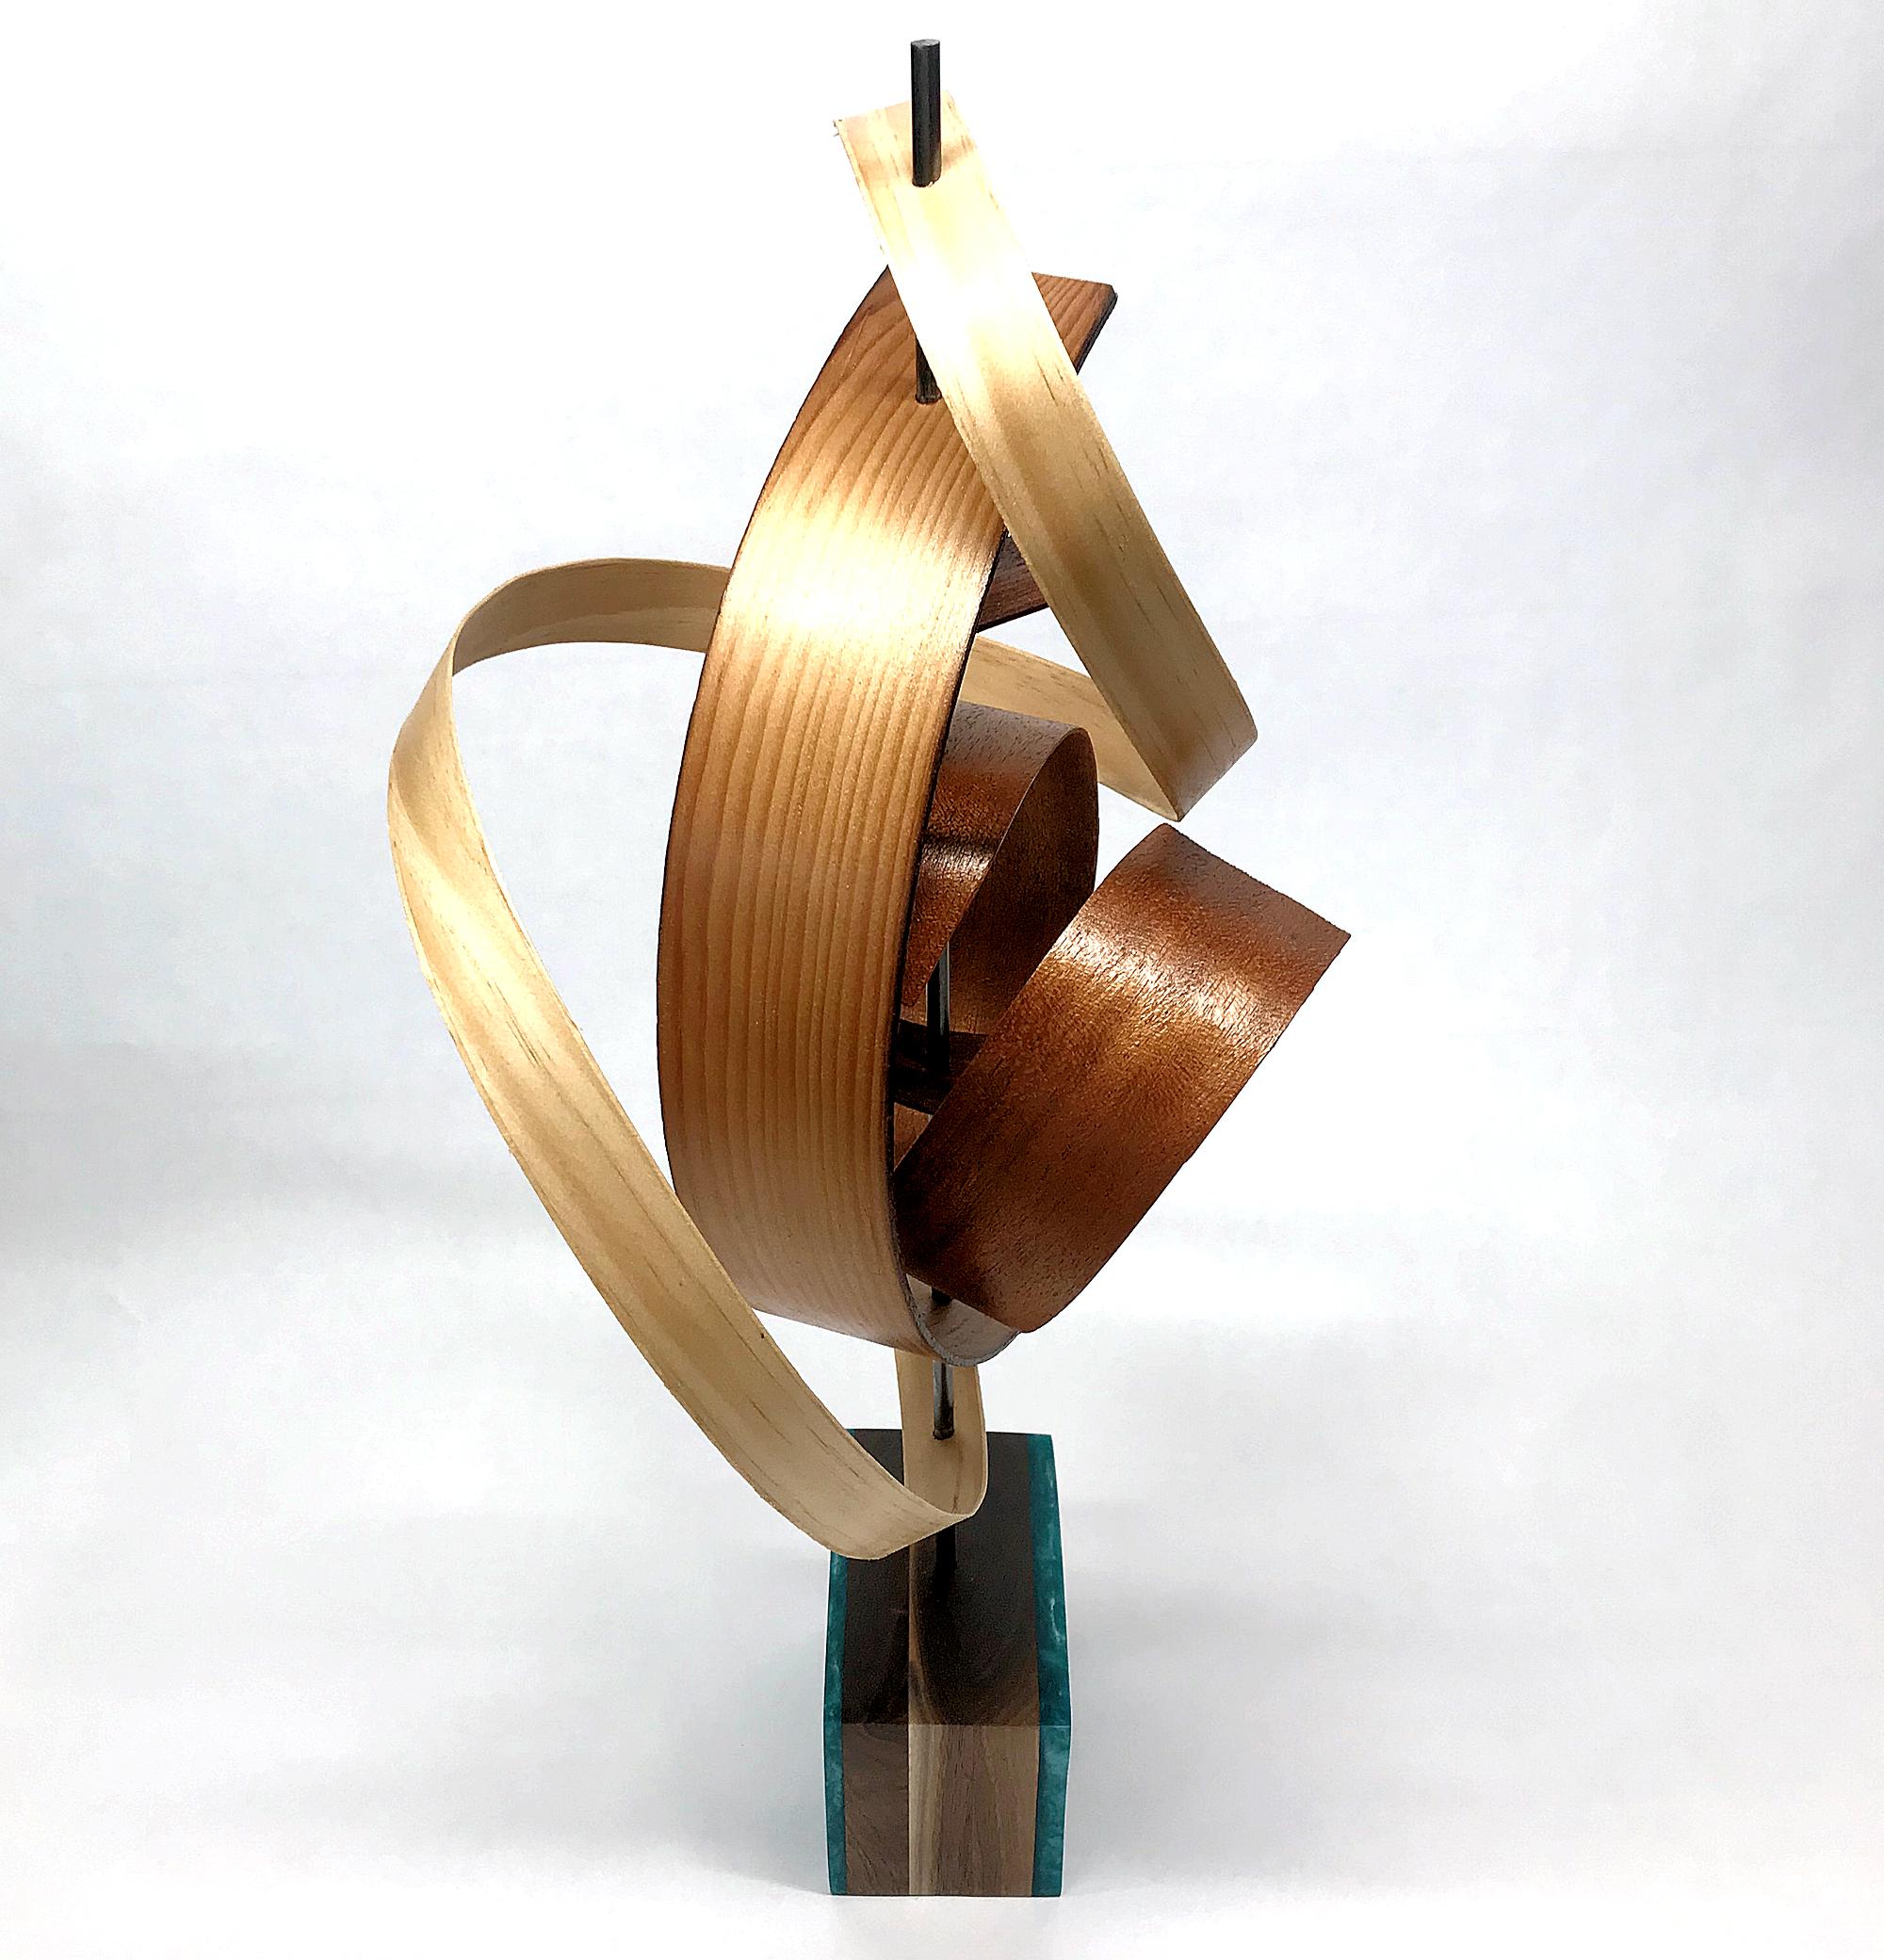 This Mid-Century Modern Inspired Wood Sculpture is comprised of pine and mahogany slats woven about a steel rod and sits atop a black walnut base which features green/blue epoxy accents. 
Title: Ribbon
Artist: Jeff Linenkugel

About the Artist:
Jeff